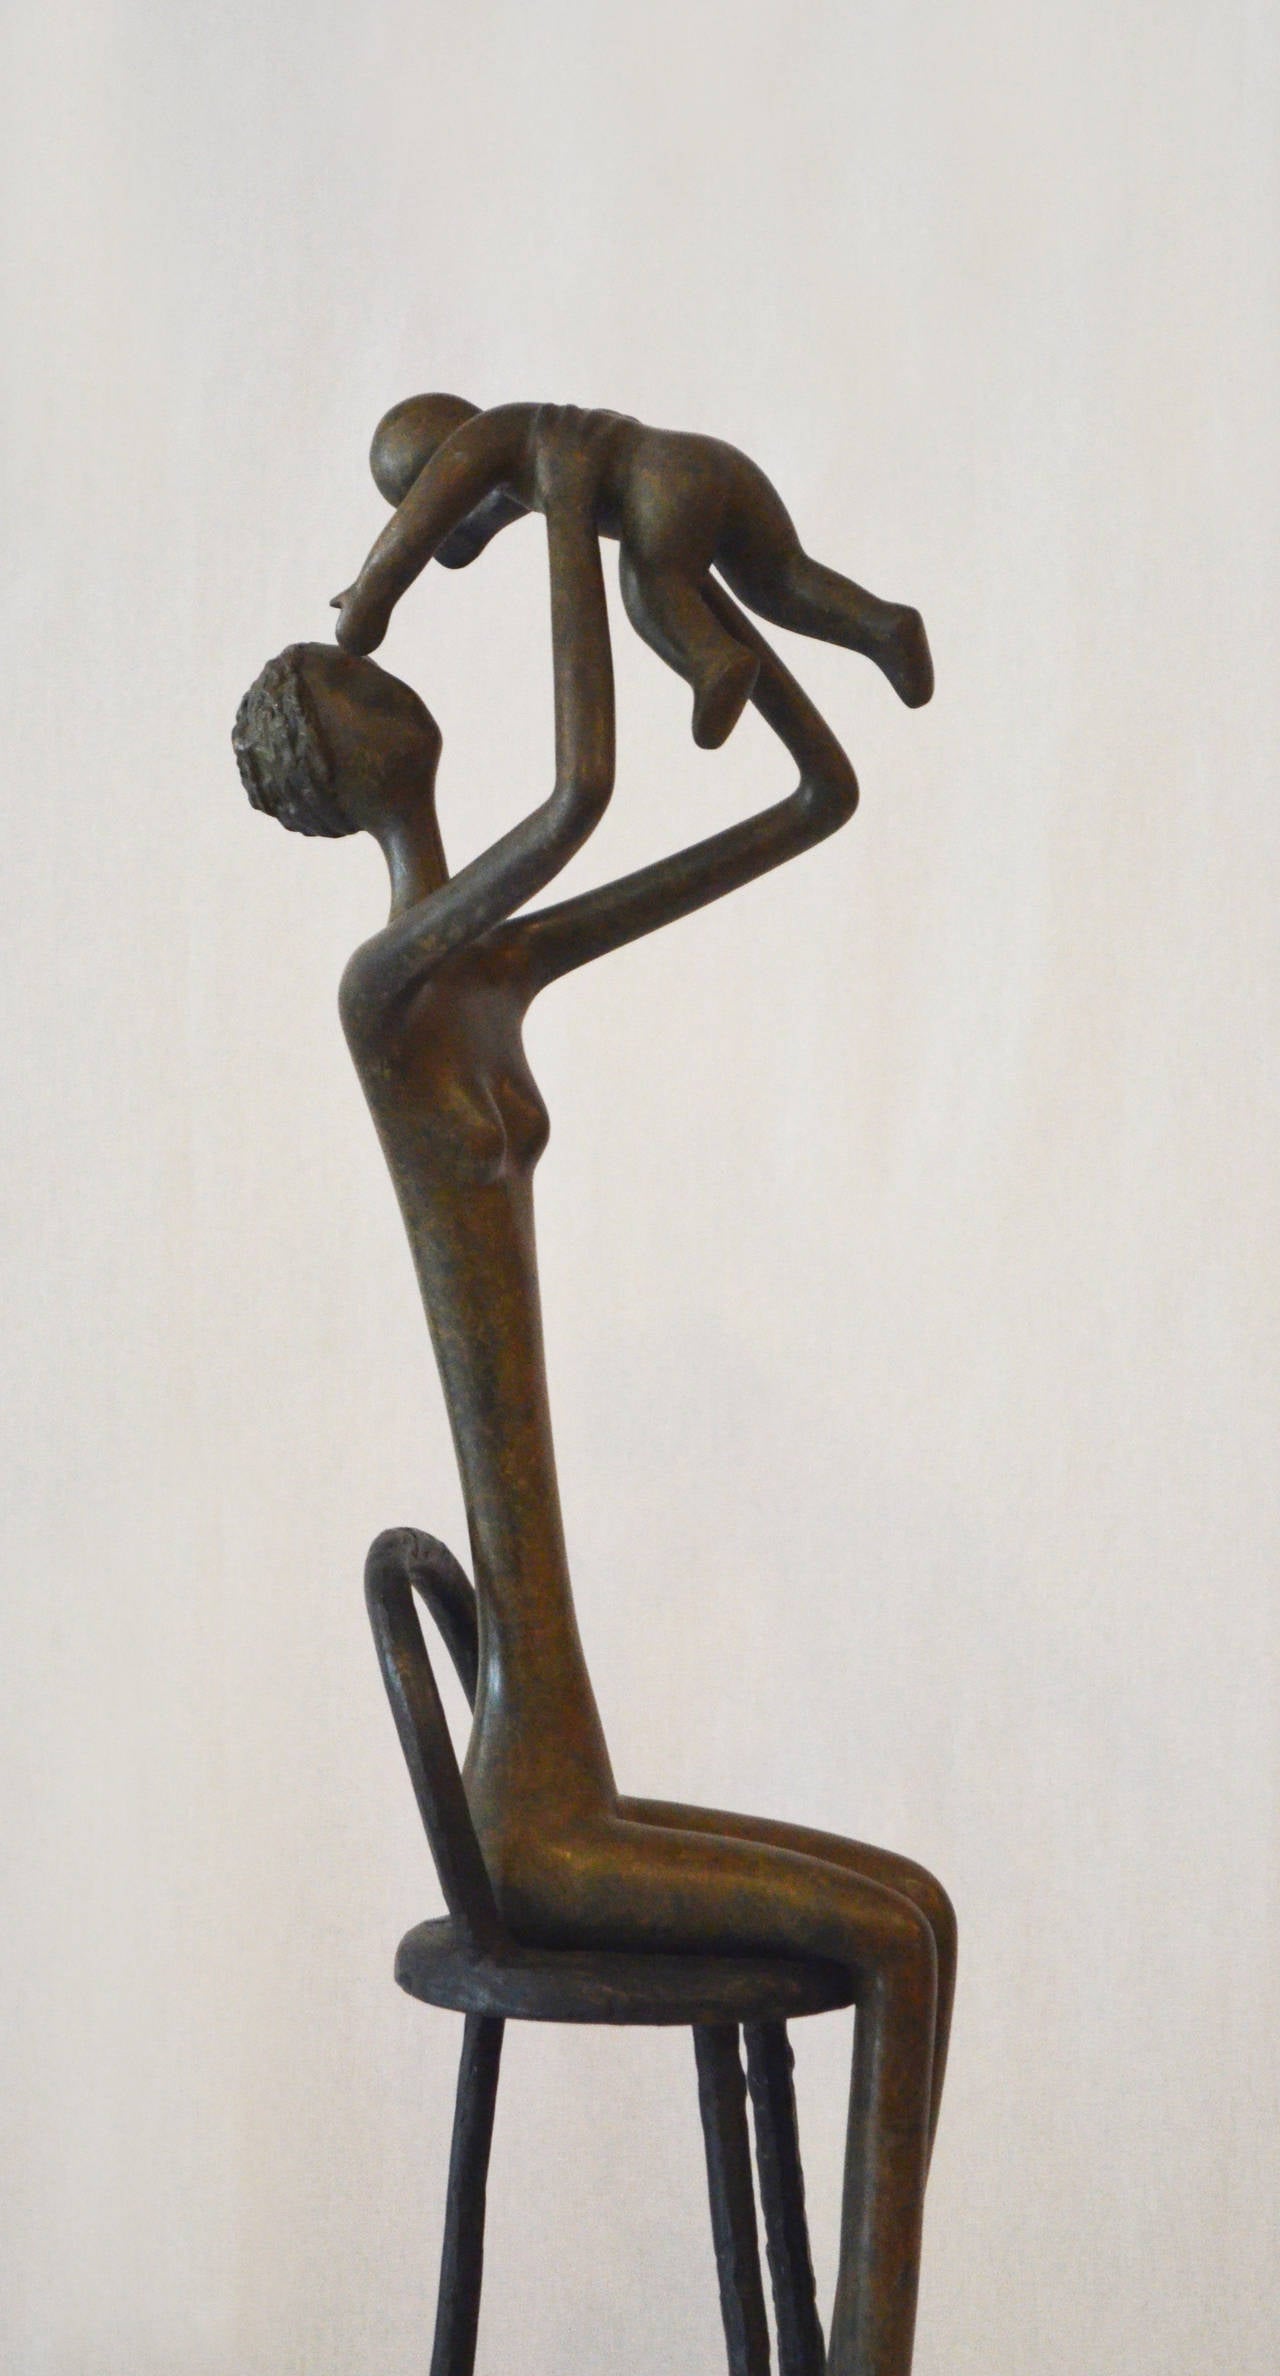 Mother and Son on Stool - Sculpture by Ruth Bloch